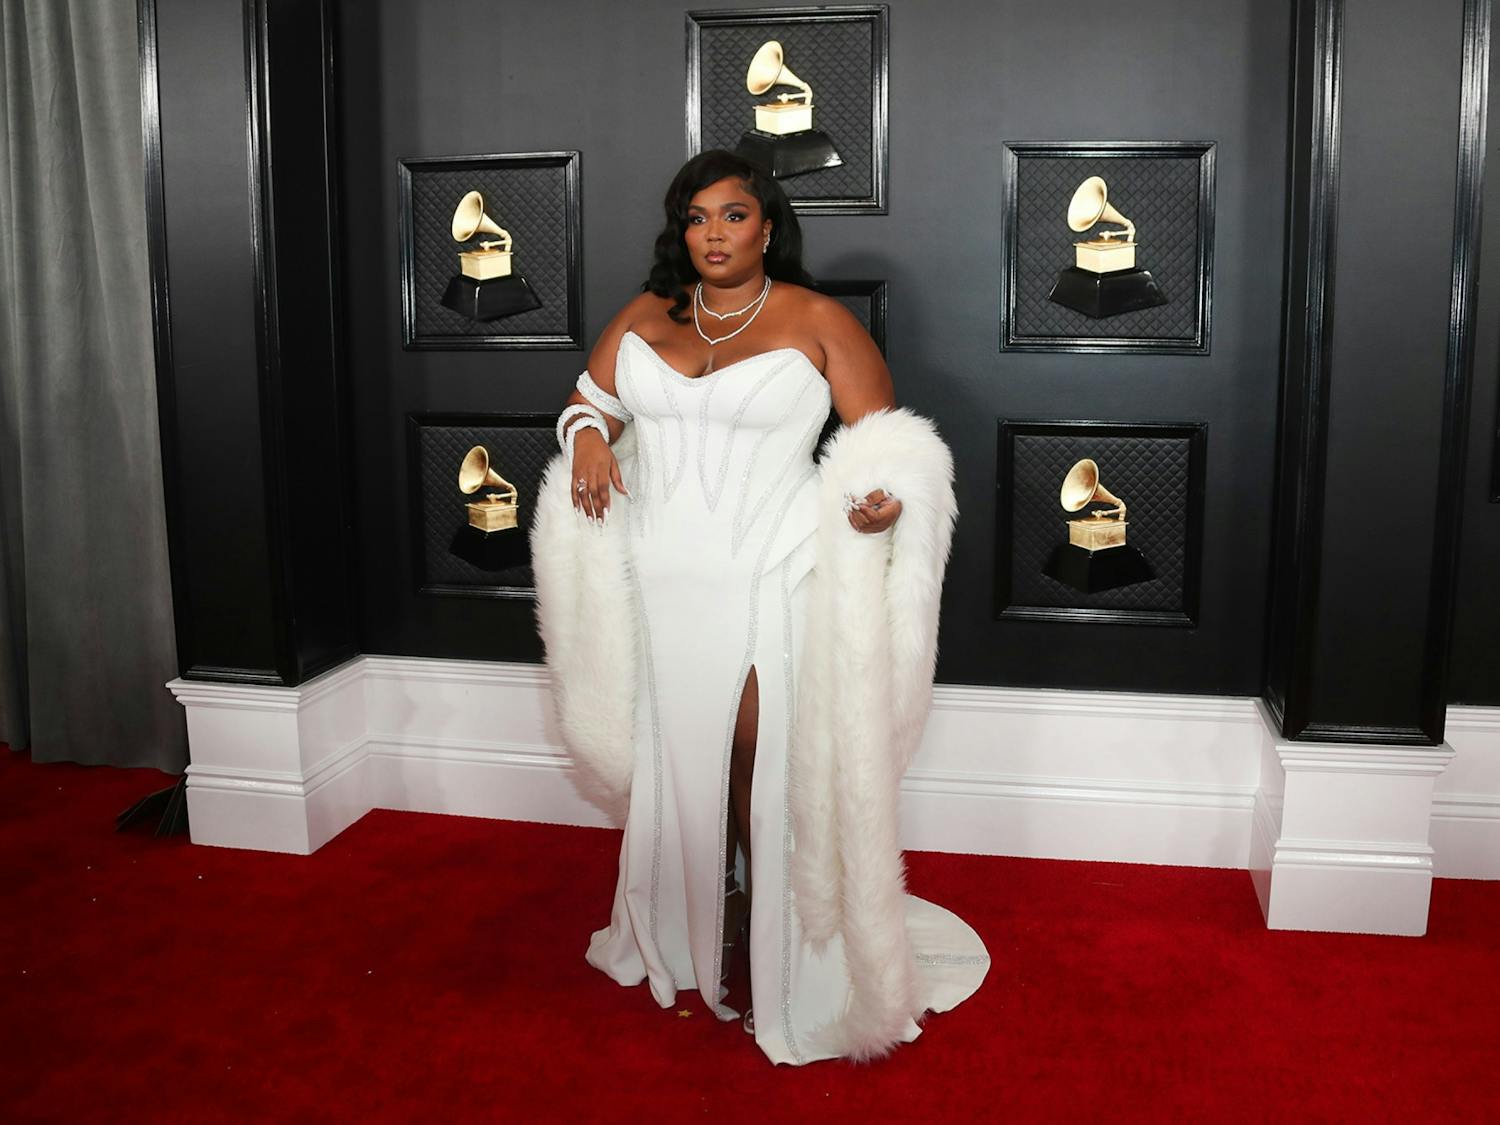 Lizzo arrives for the 62nd Grammy Awards at Staples Center in Los Angeles on Sunday, Jan. 26, 2020. Photo courtesy of Allen J. Schaben/Los Angeles Times/TNS